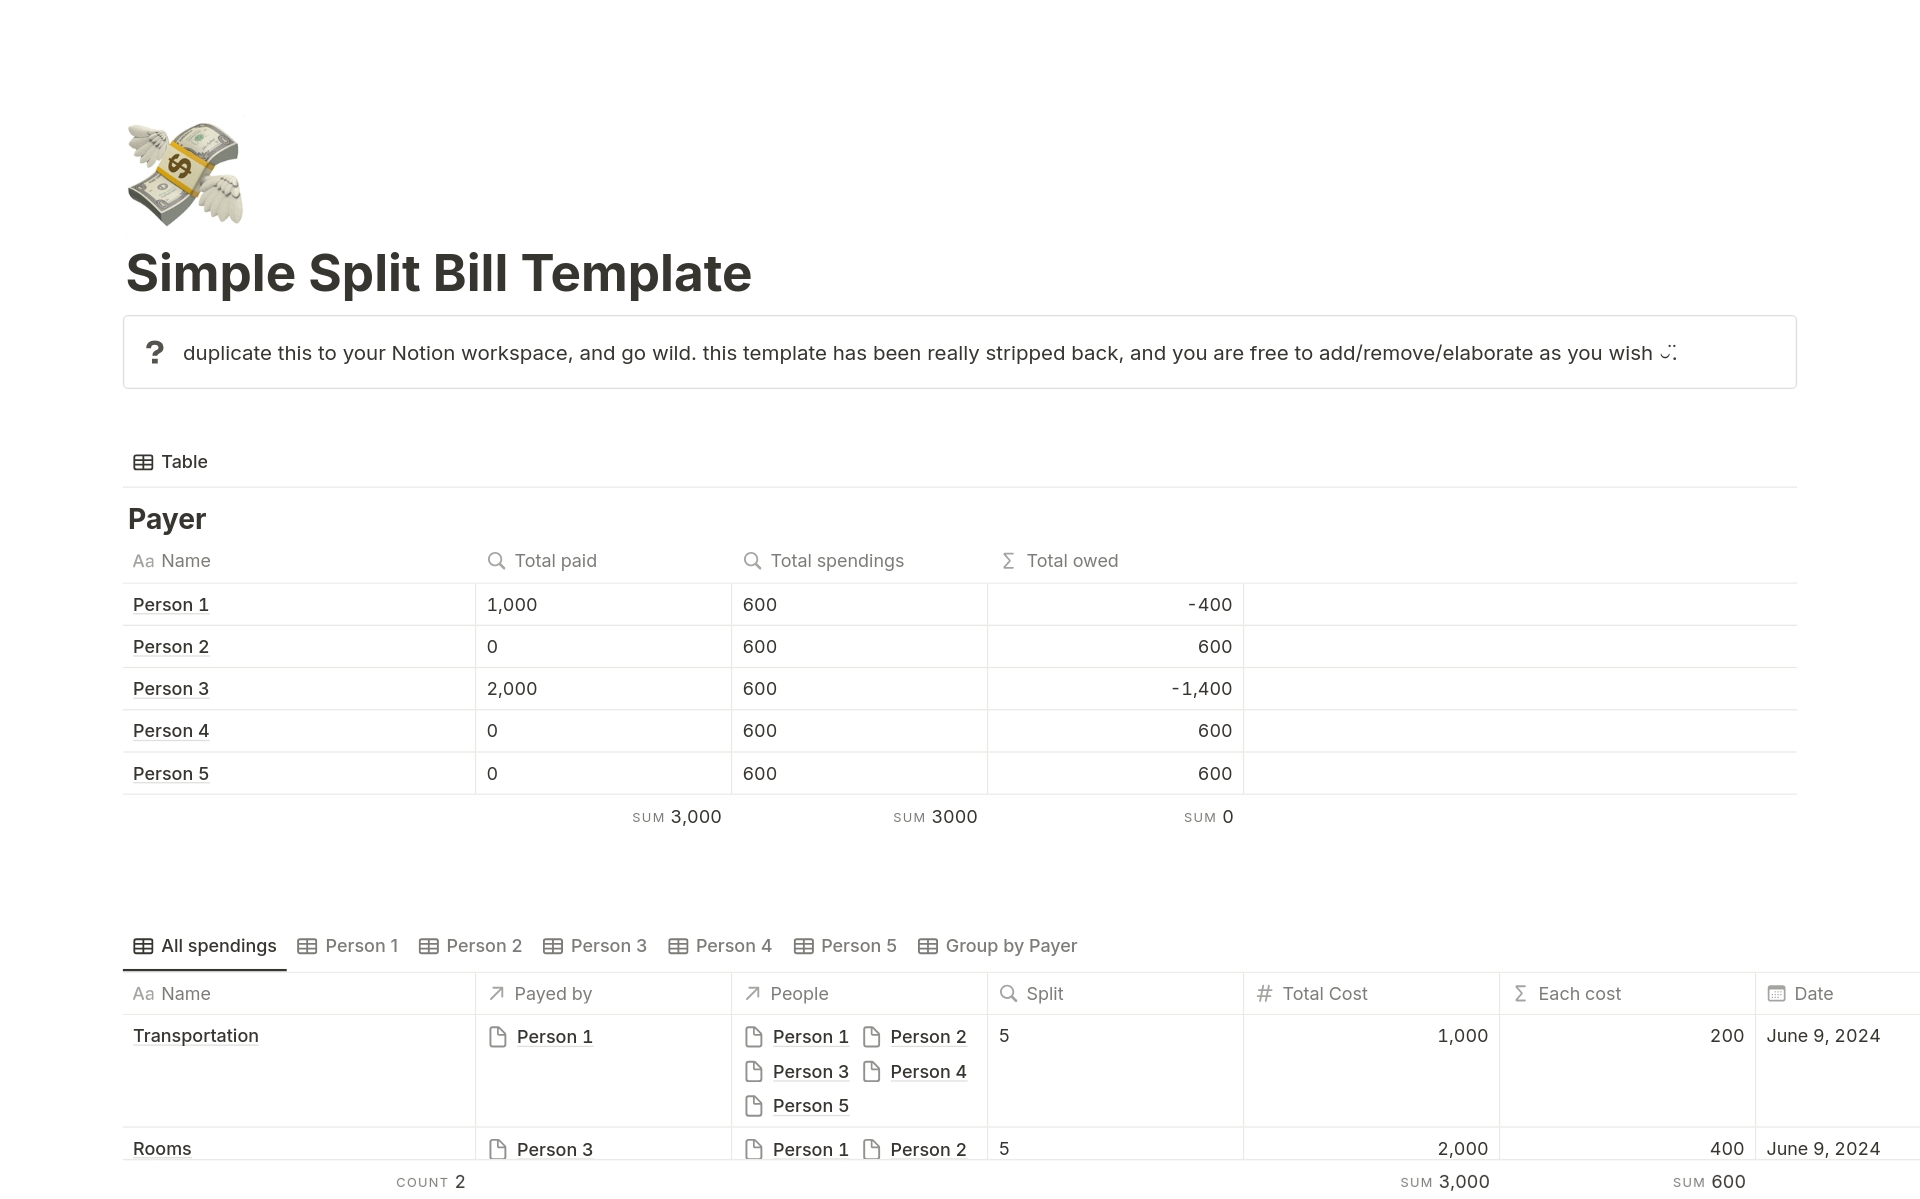 Group-oriented template for finance-management; log participants, spendings, and split bills accordingly.